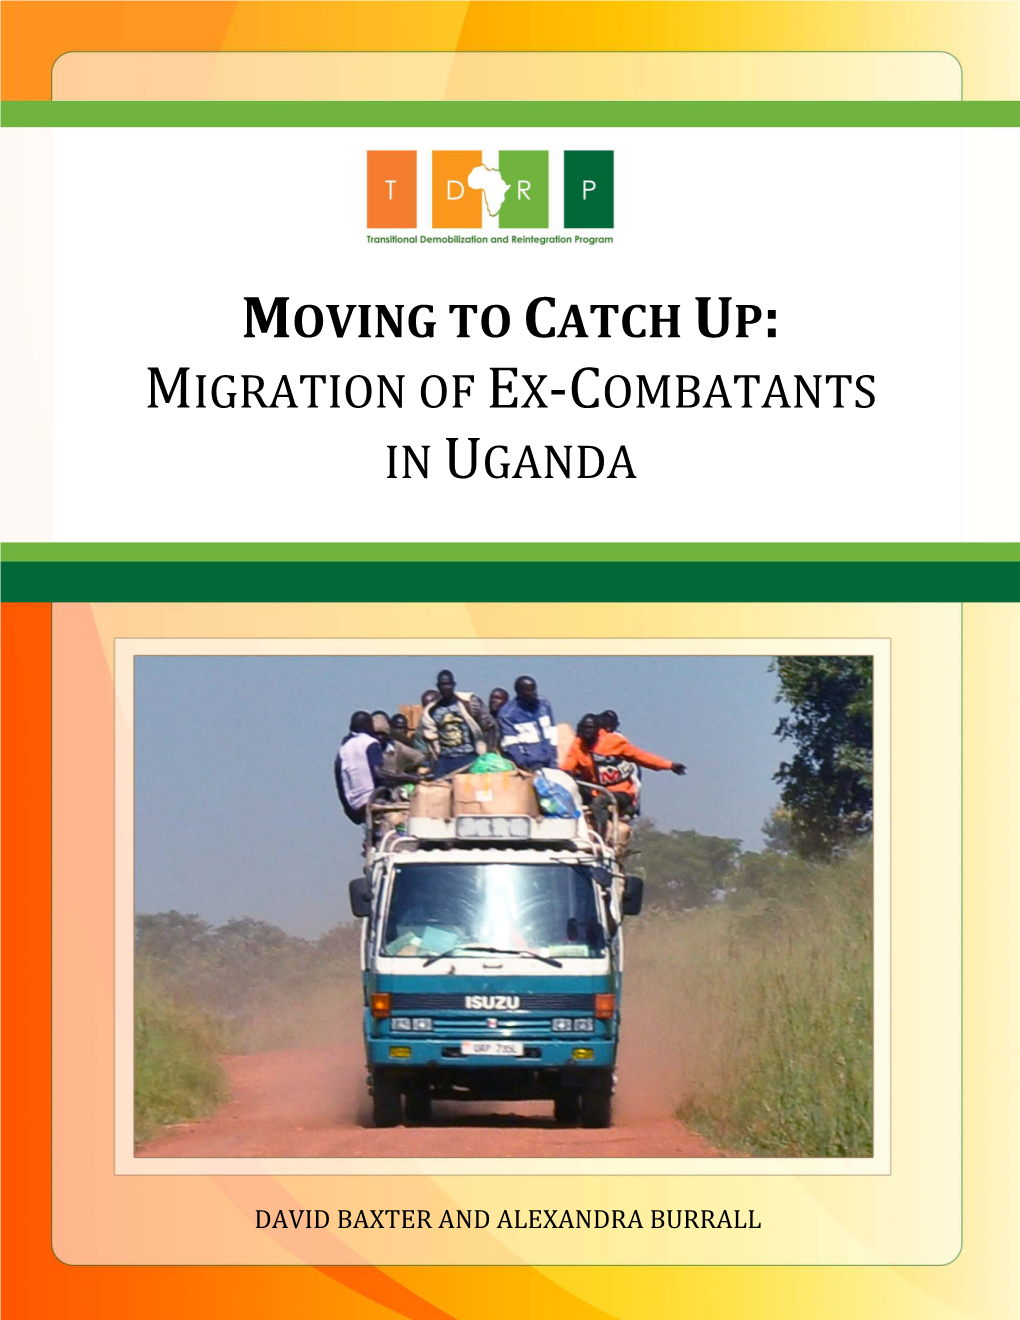 Moving to Catch Up: Migration of Ex-Combatants in Uganda